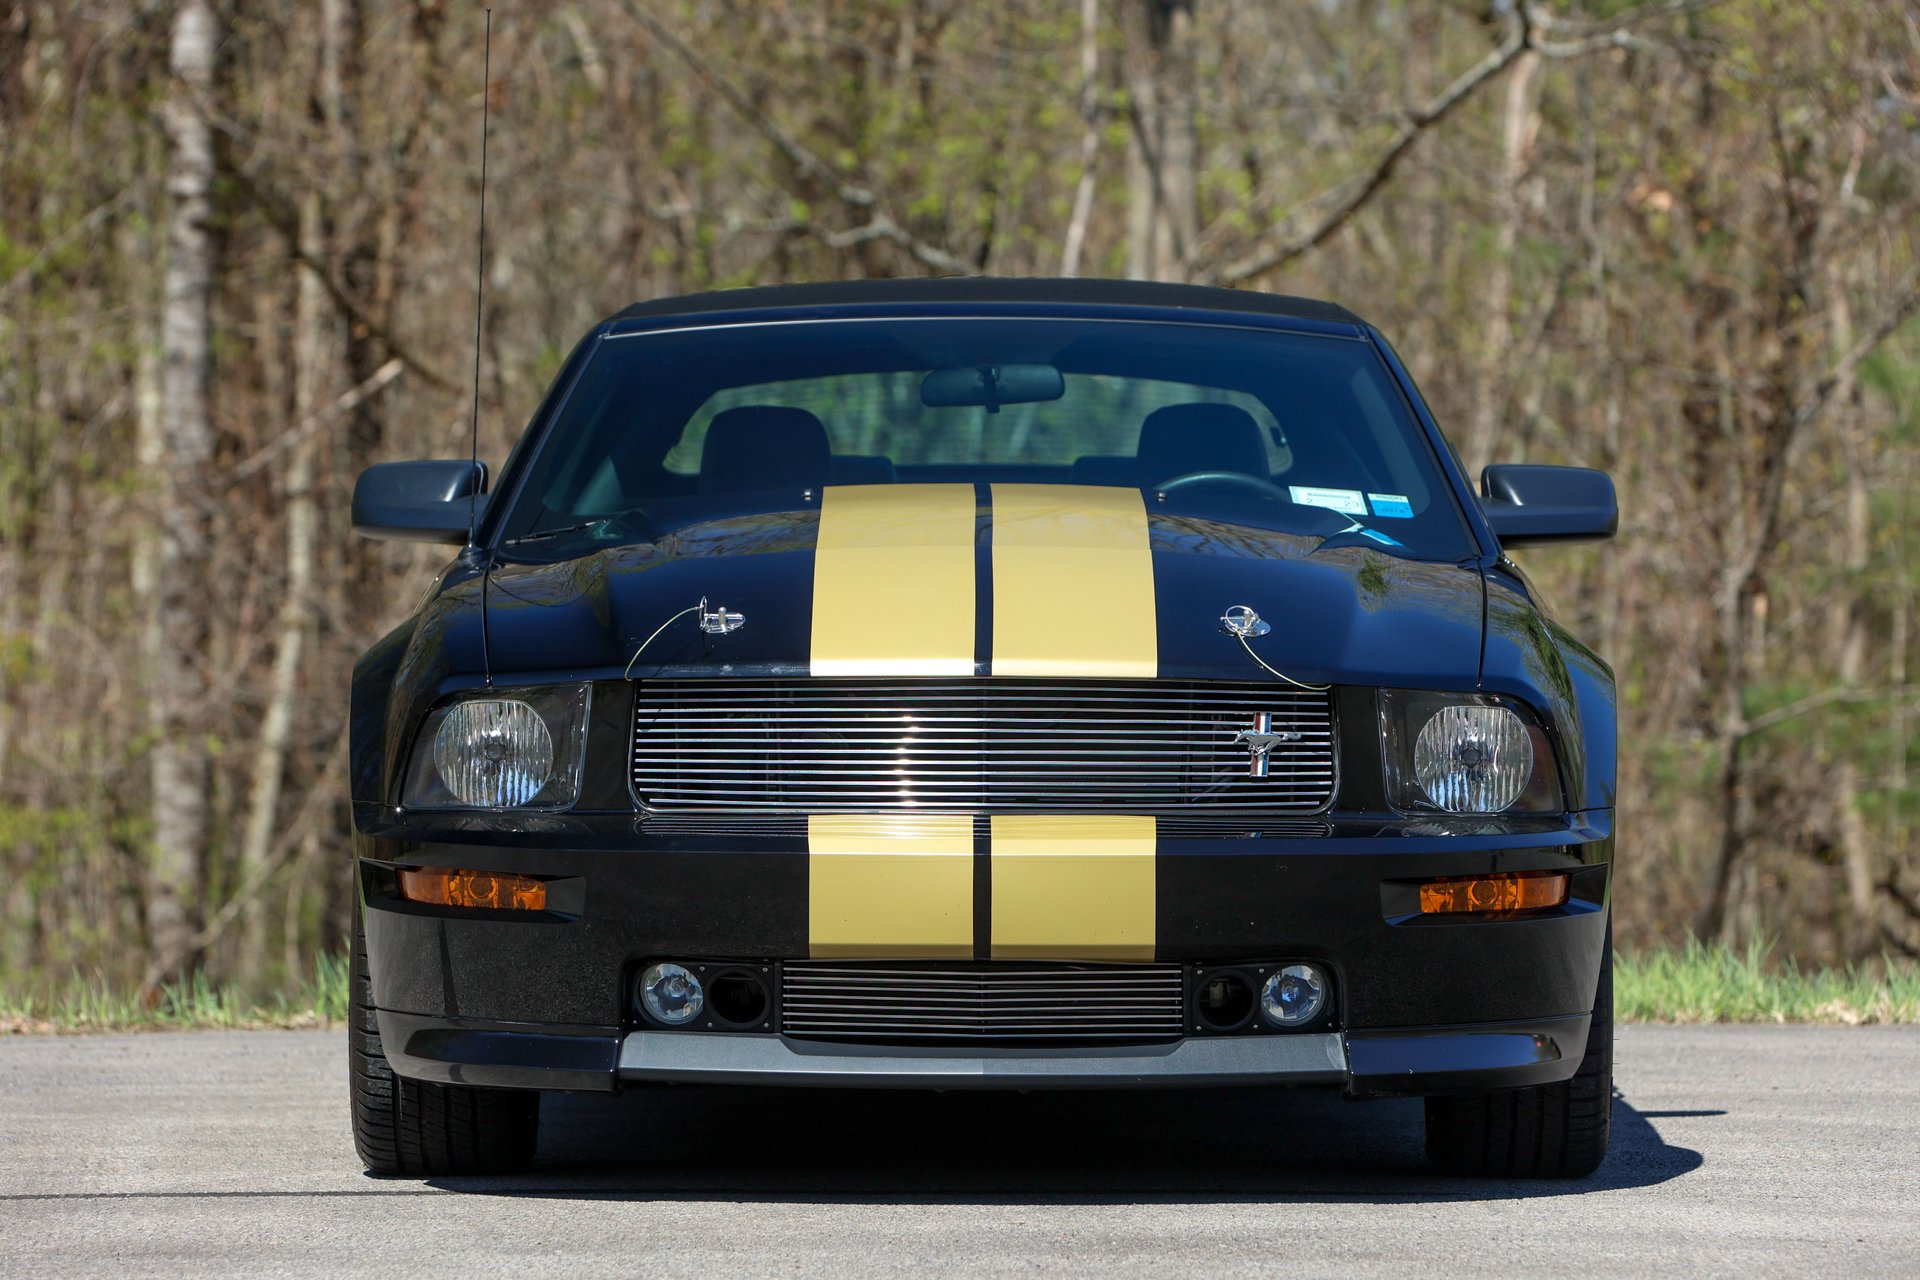 Broad Arrow Auctions | 2007 Ford Shelby Mustang GT-H Convertible 'Executive Car'